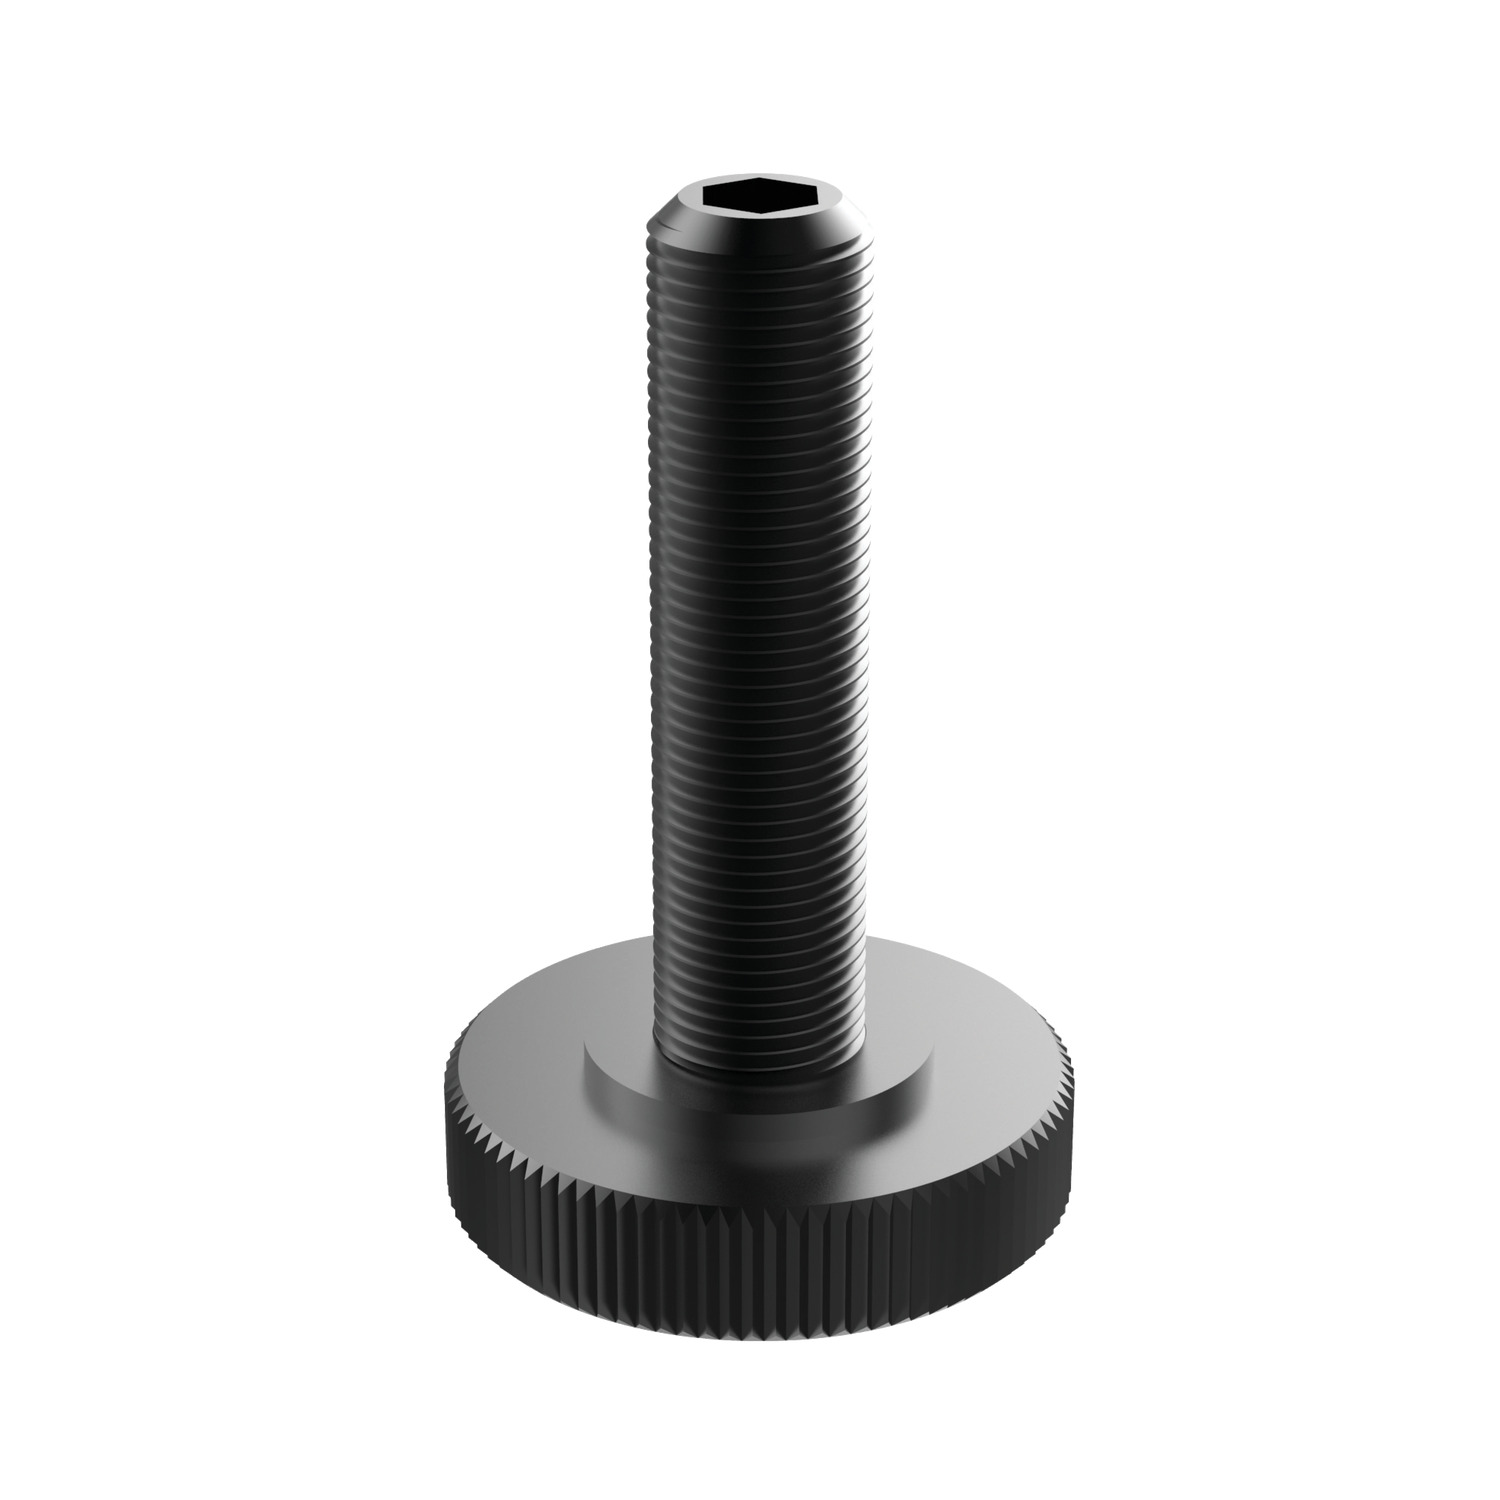 Product 10410, Support Screw for adjustable clamps / 